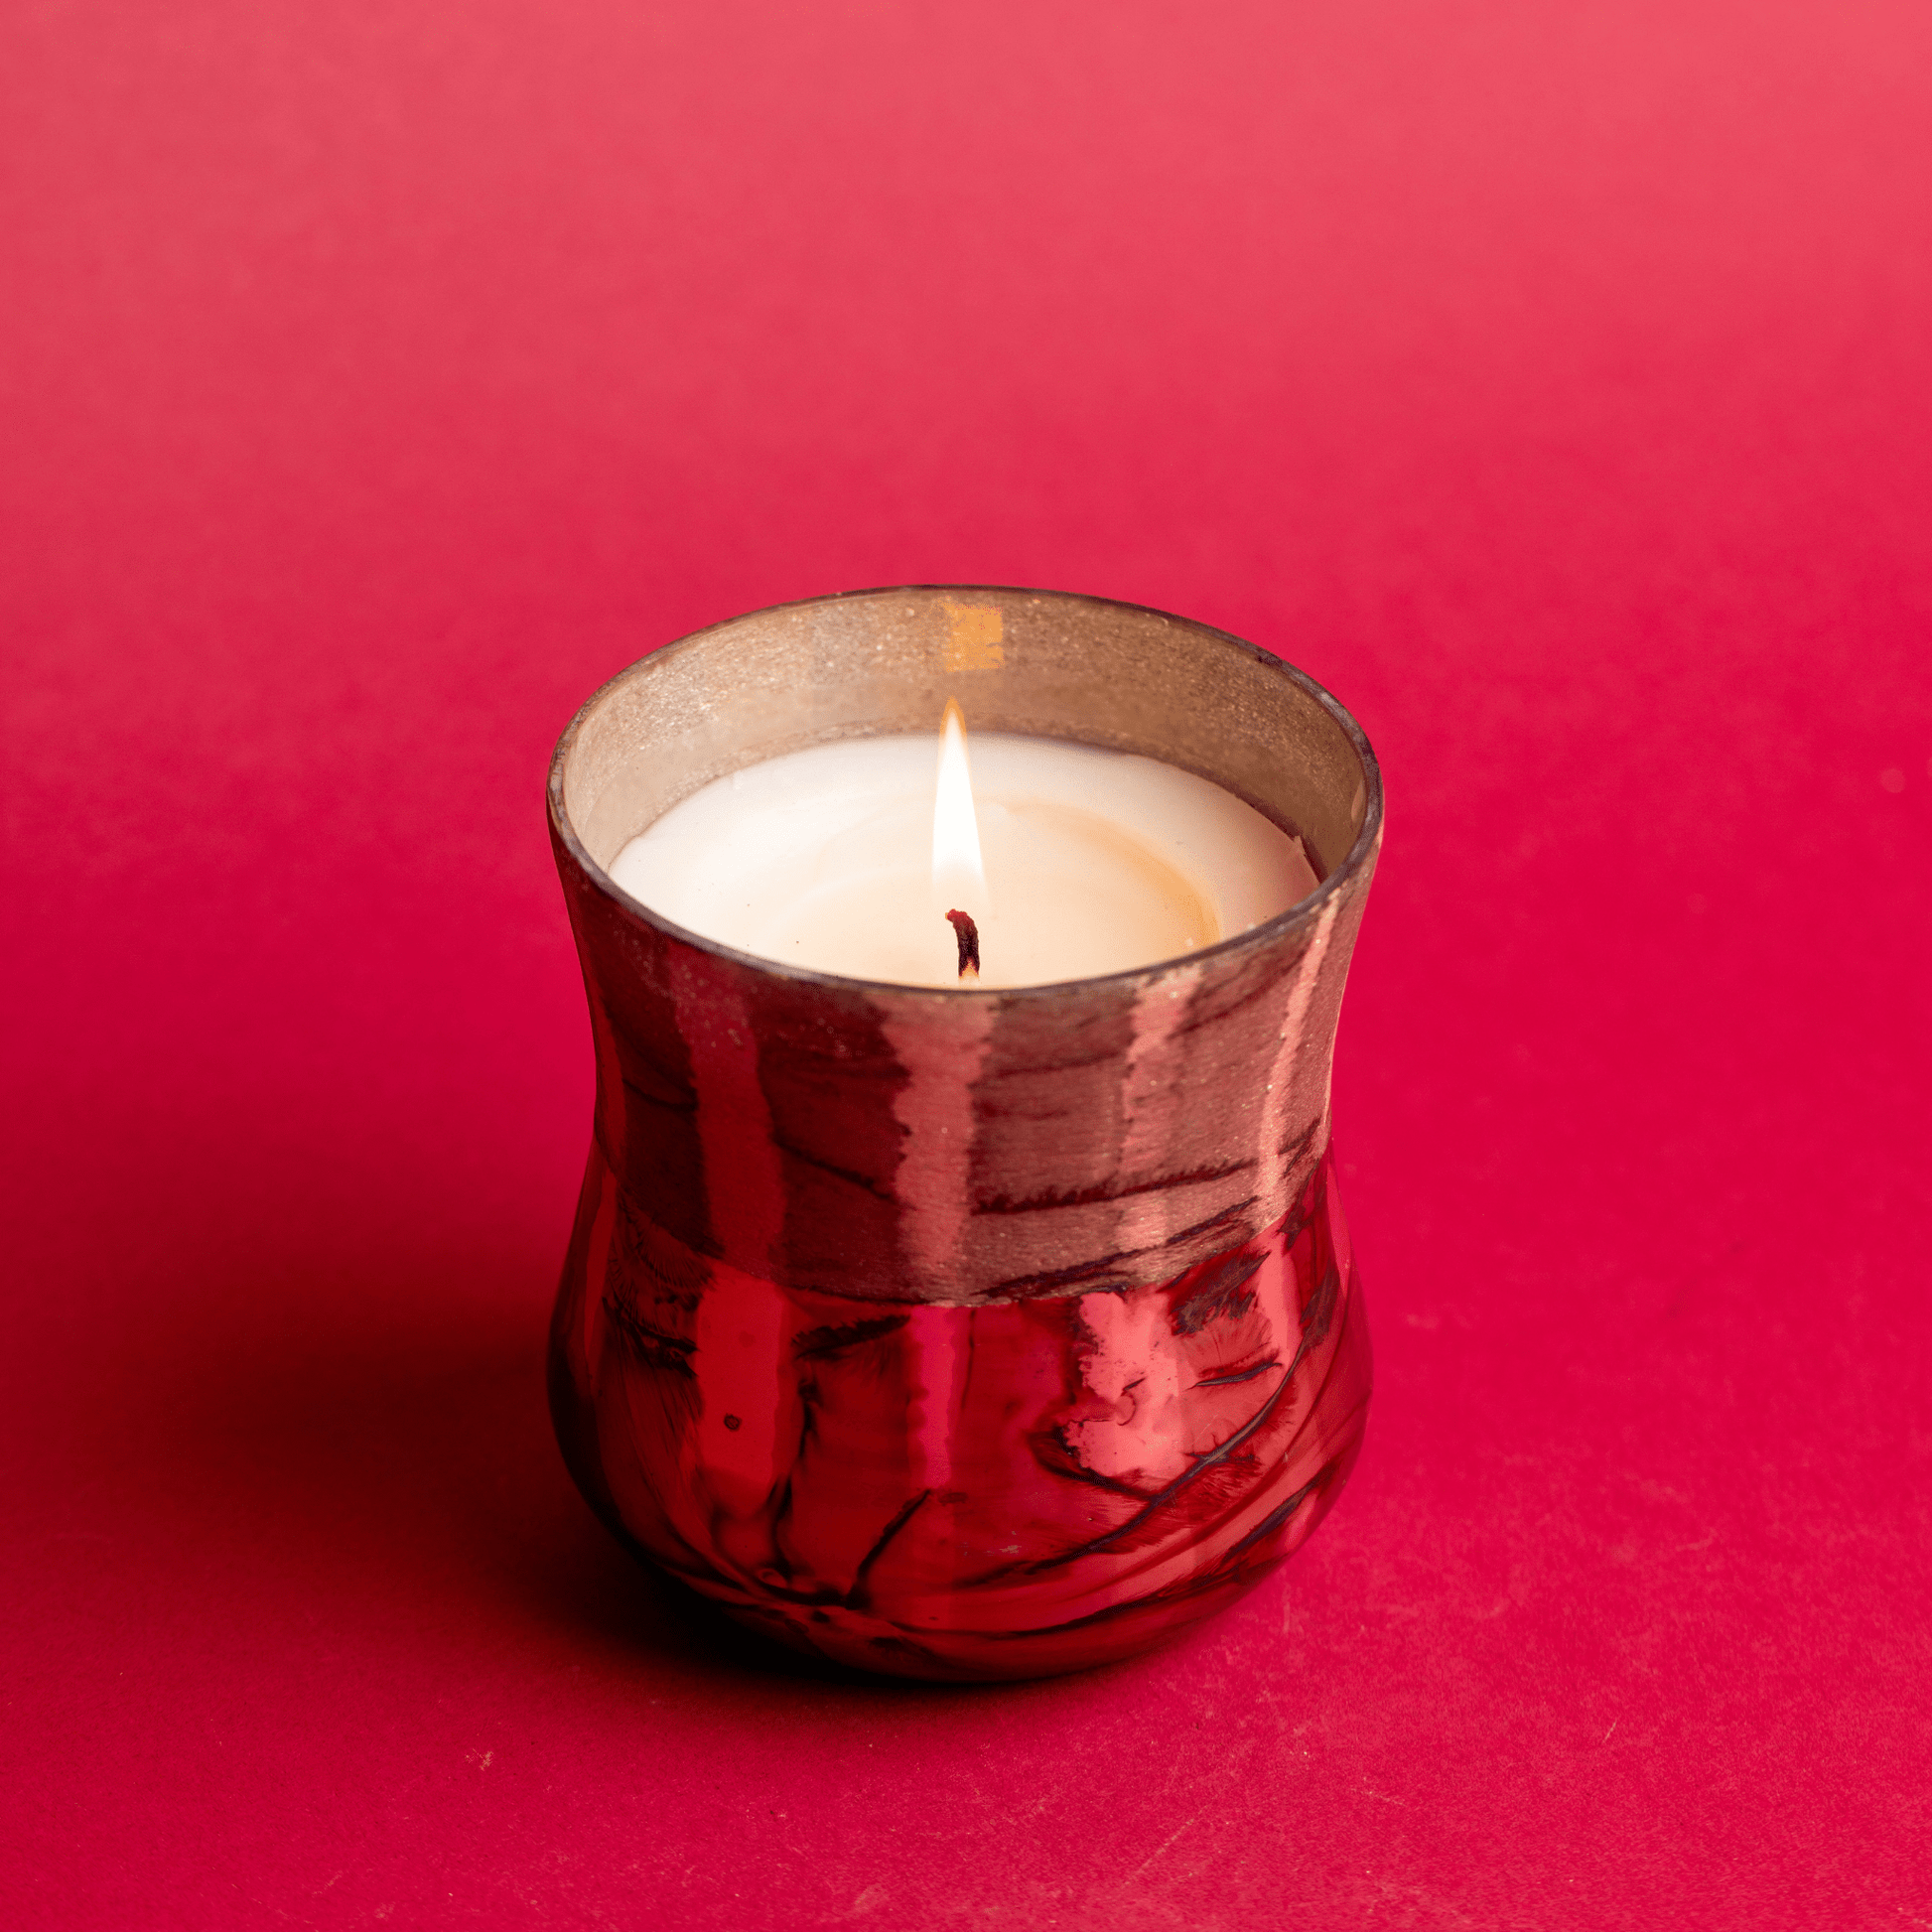 Top view of a lit Cypress & Fir - 9oz Frosted & Shiny Copper Metallic Glass candle on a red background.